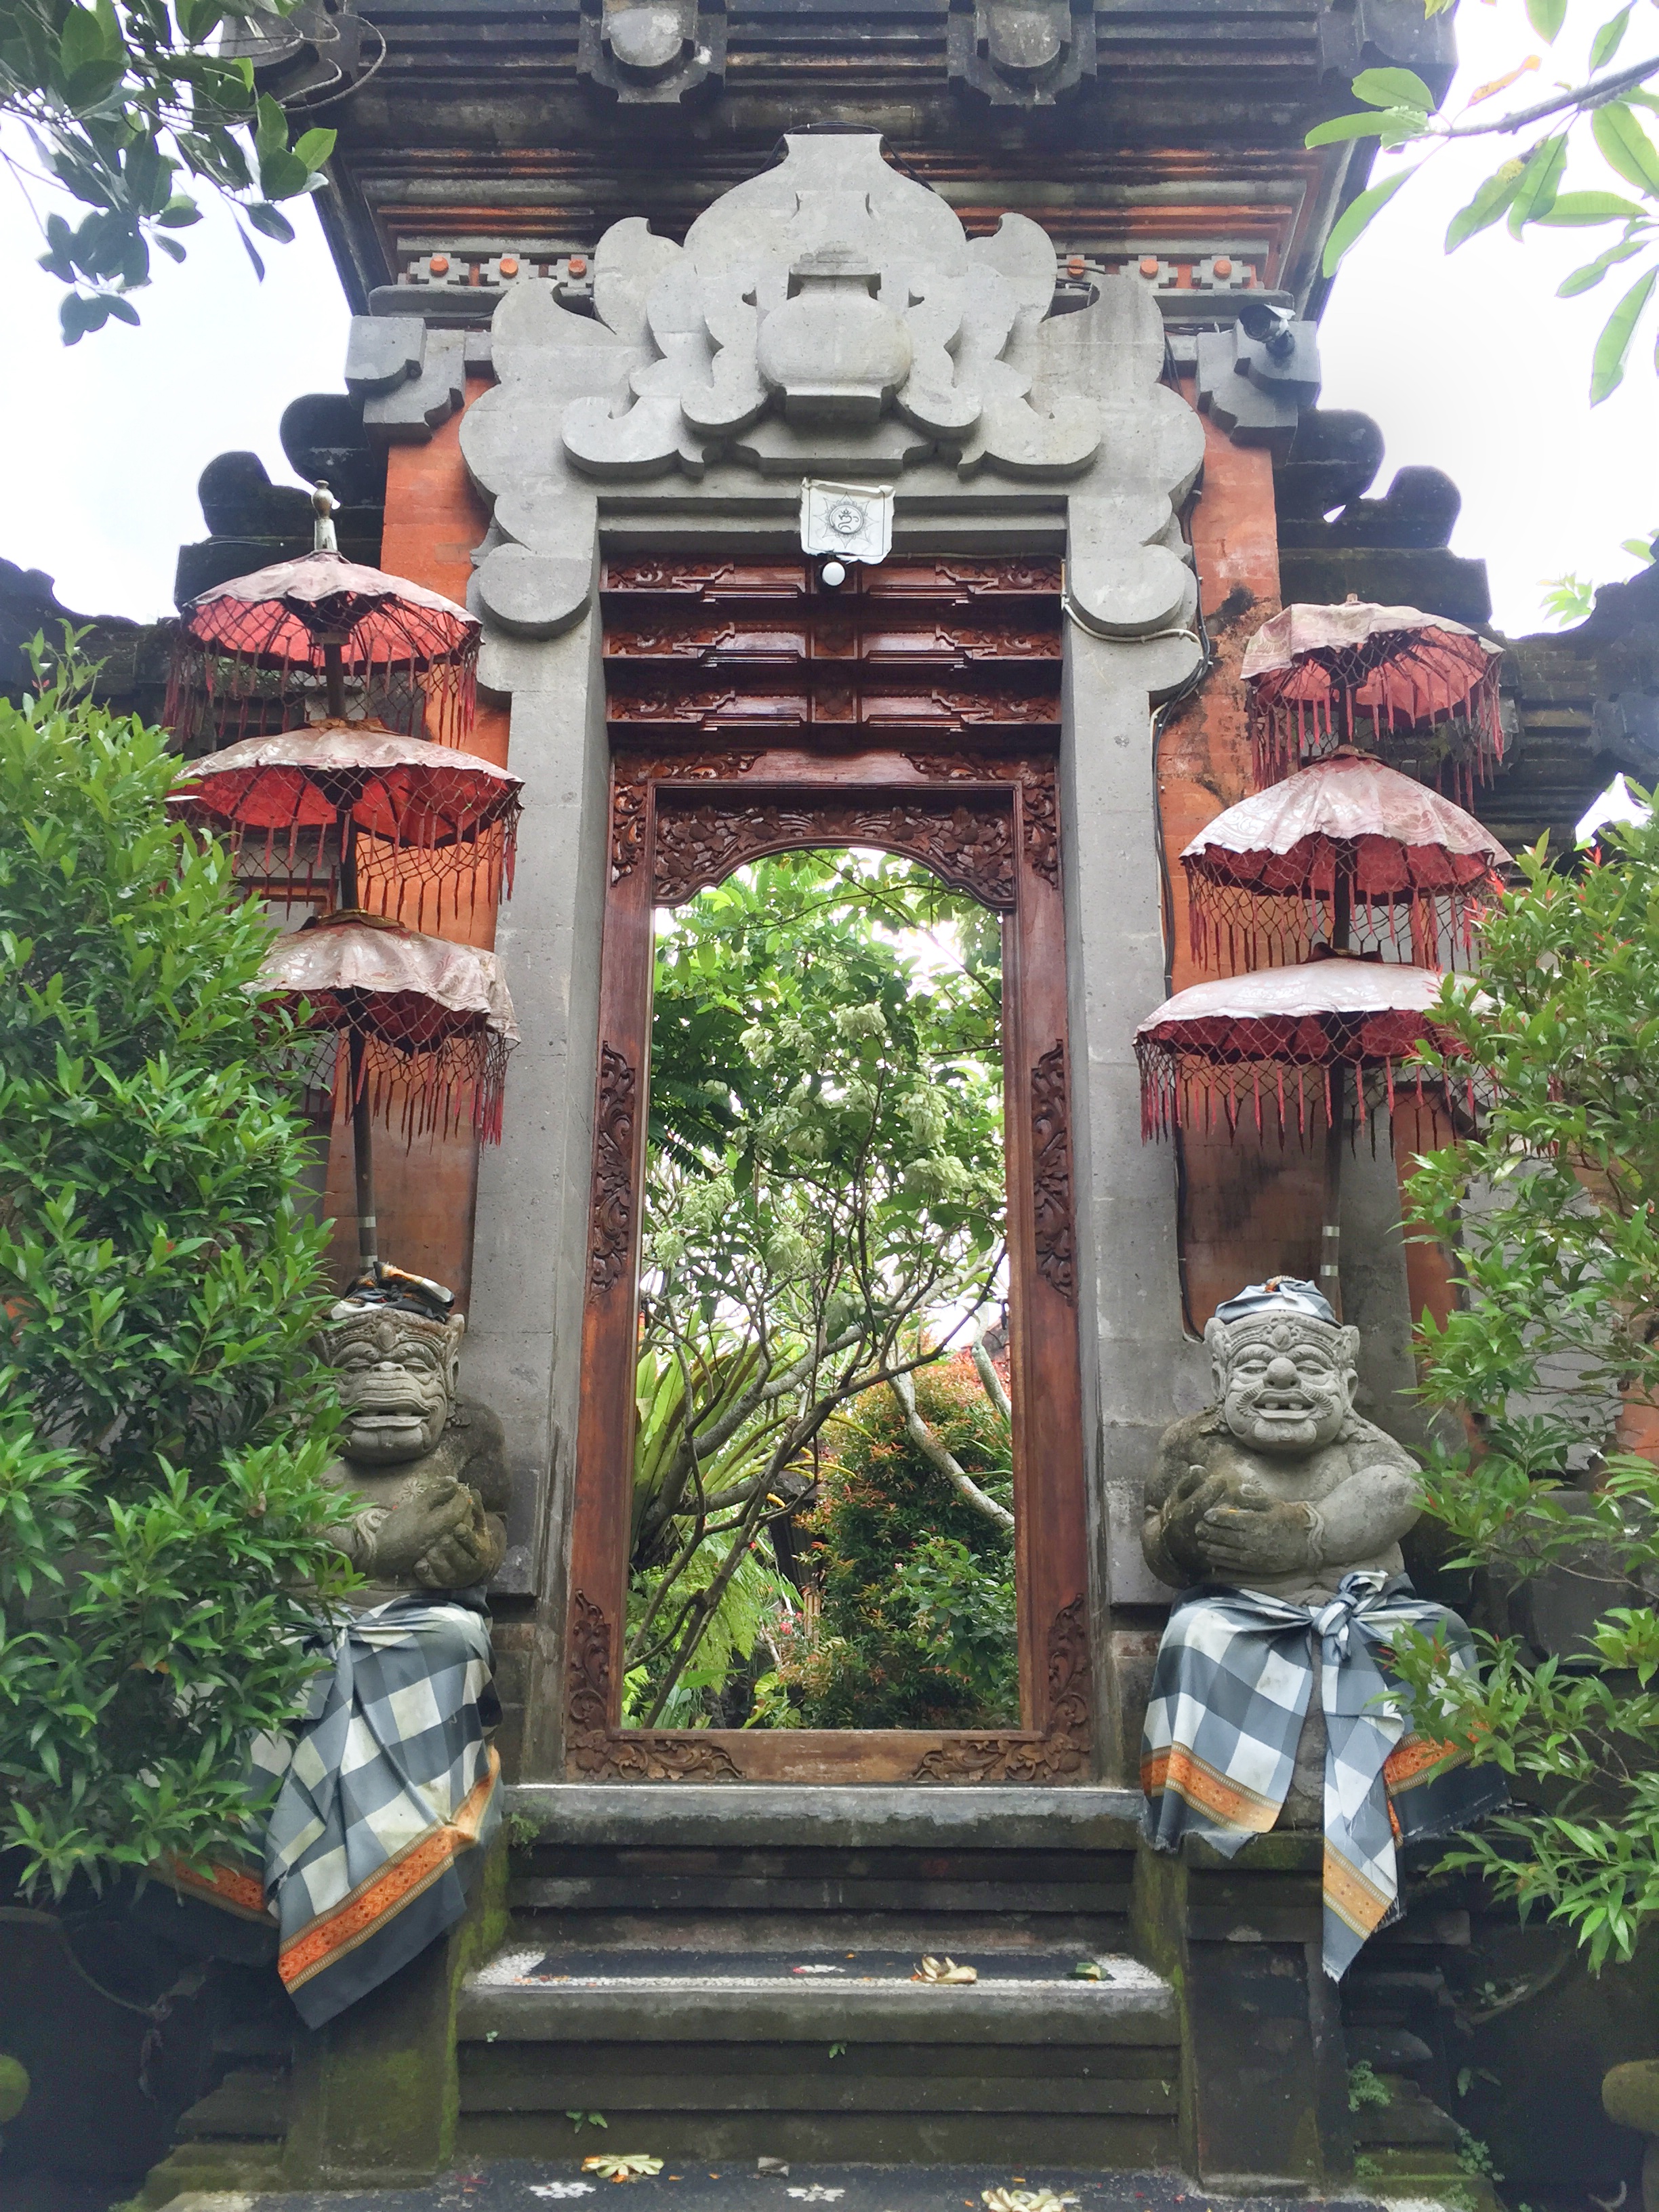 Temples and statues | EAT.PRAY.MOVE Yoga | Bali, Indonesia